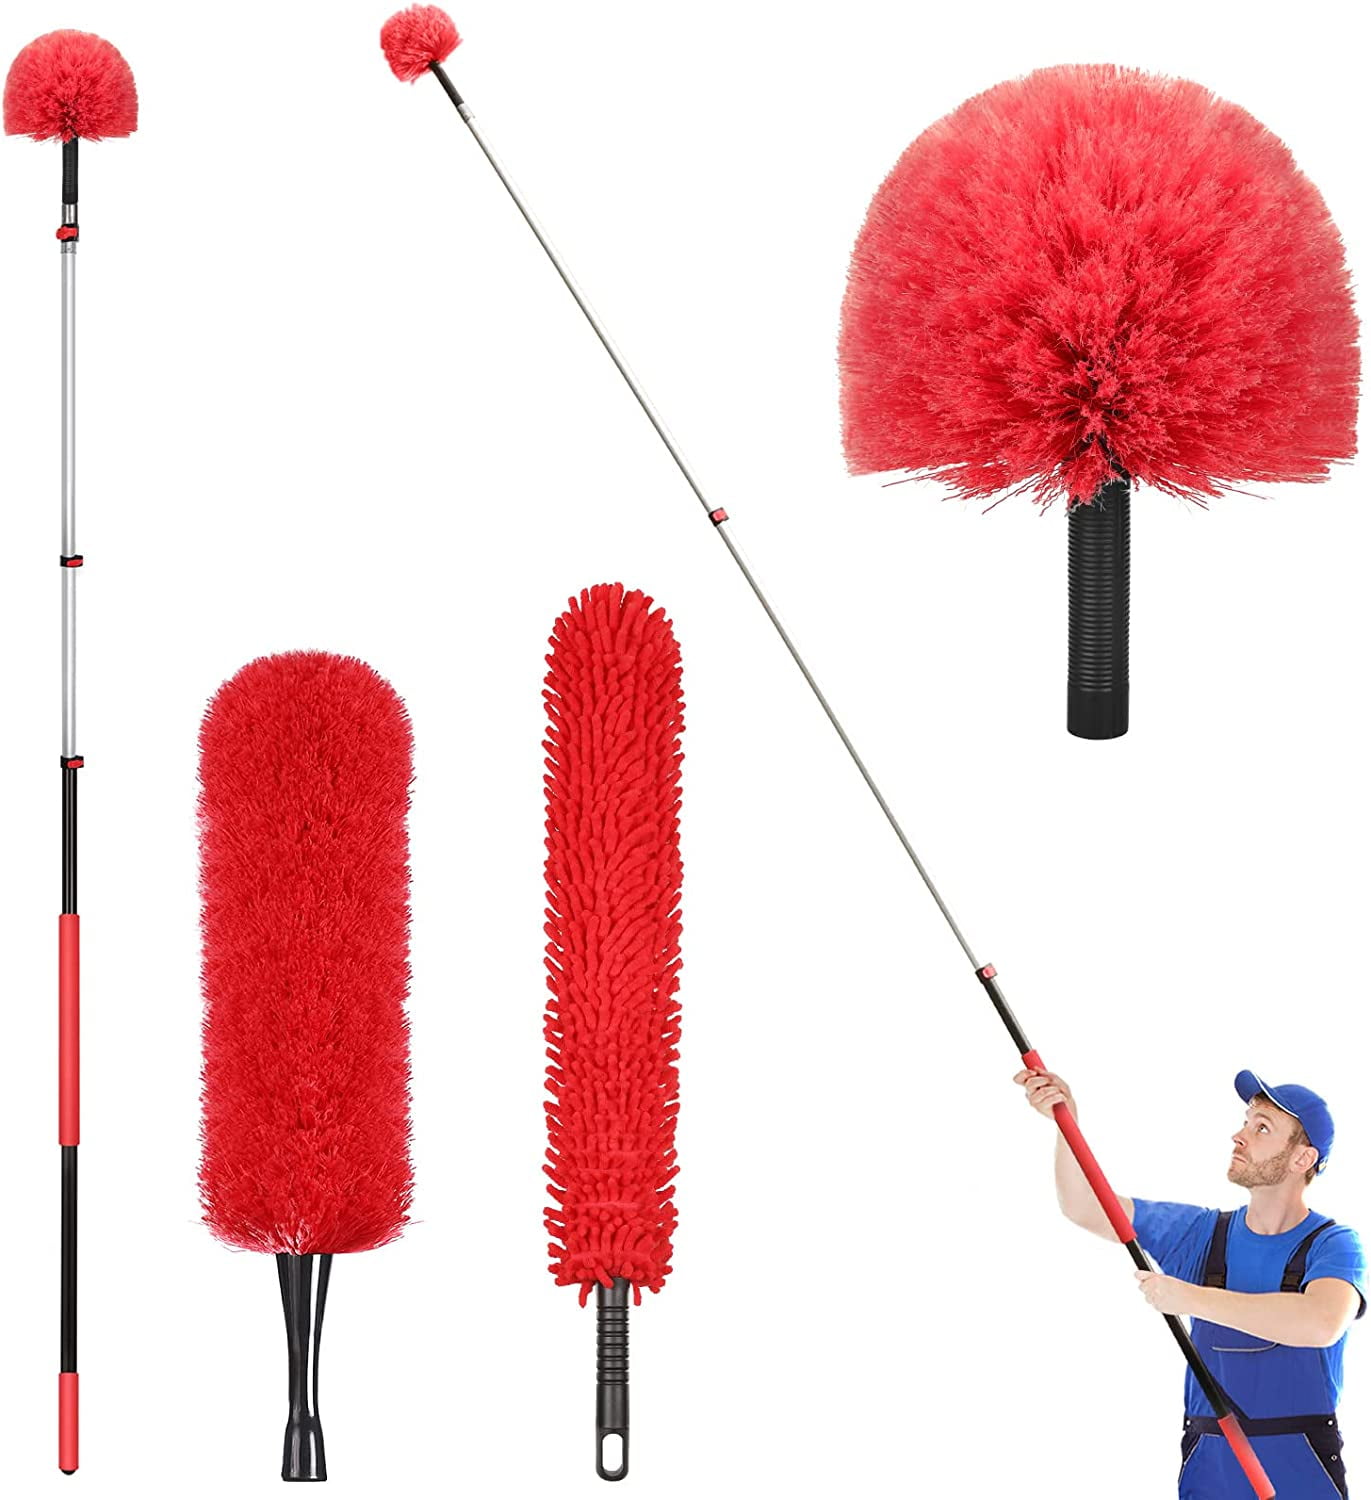 5-12 Ft Window Washing Kit with Extension Pole (20+ Foot Reach) // Window  Cleani